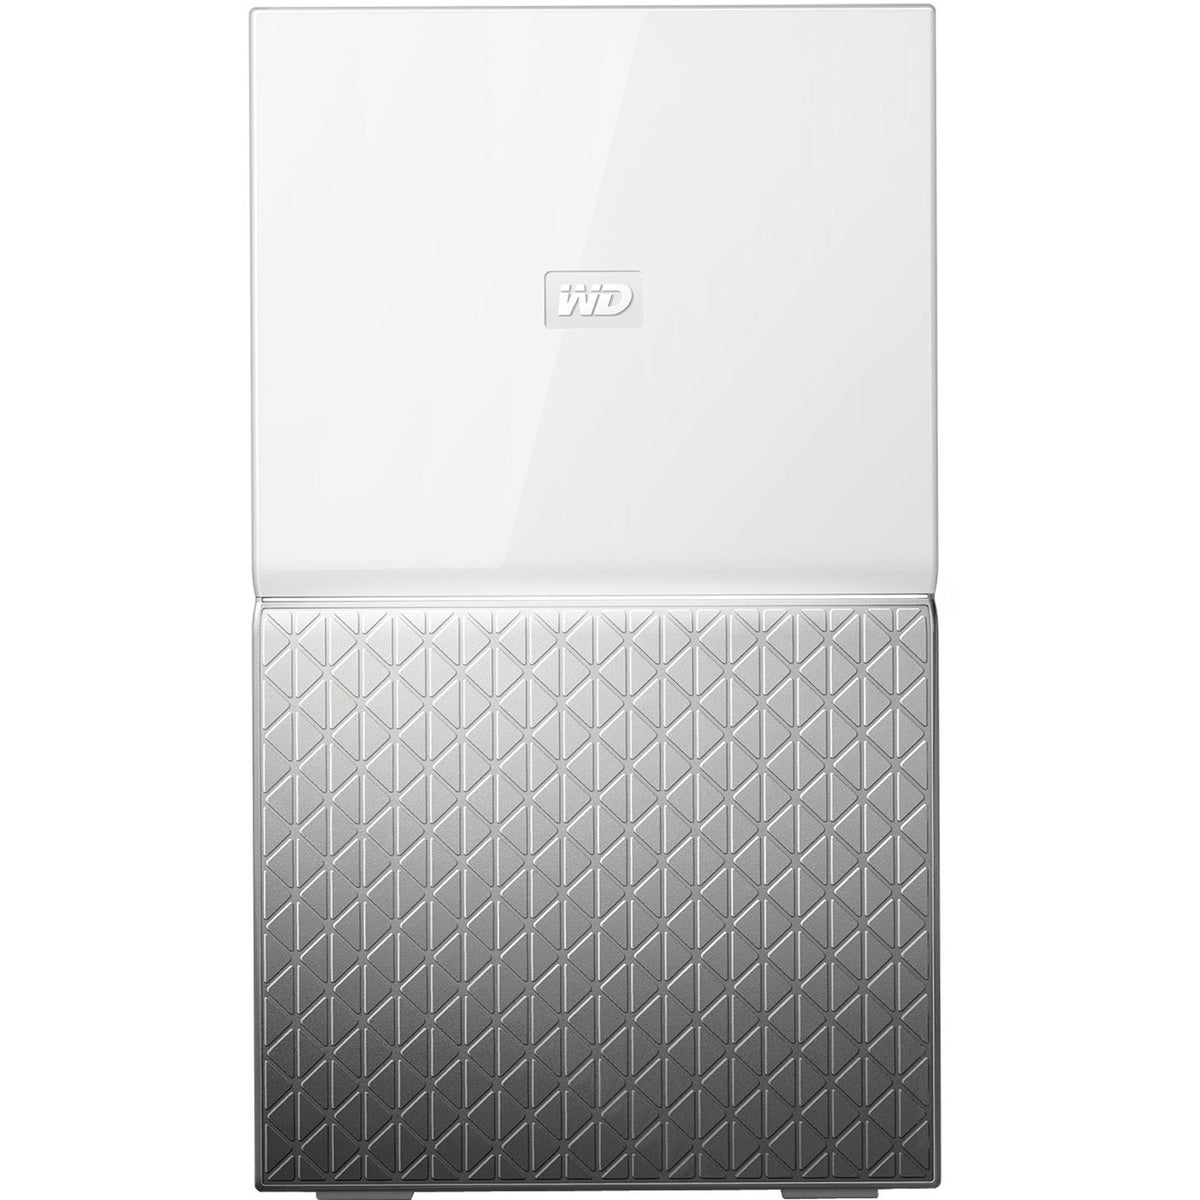 WD My Cloud Home Duo Personal Cloud Storage - WDBMUT0040JWT-NESN